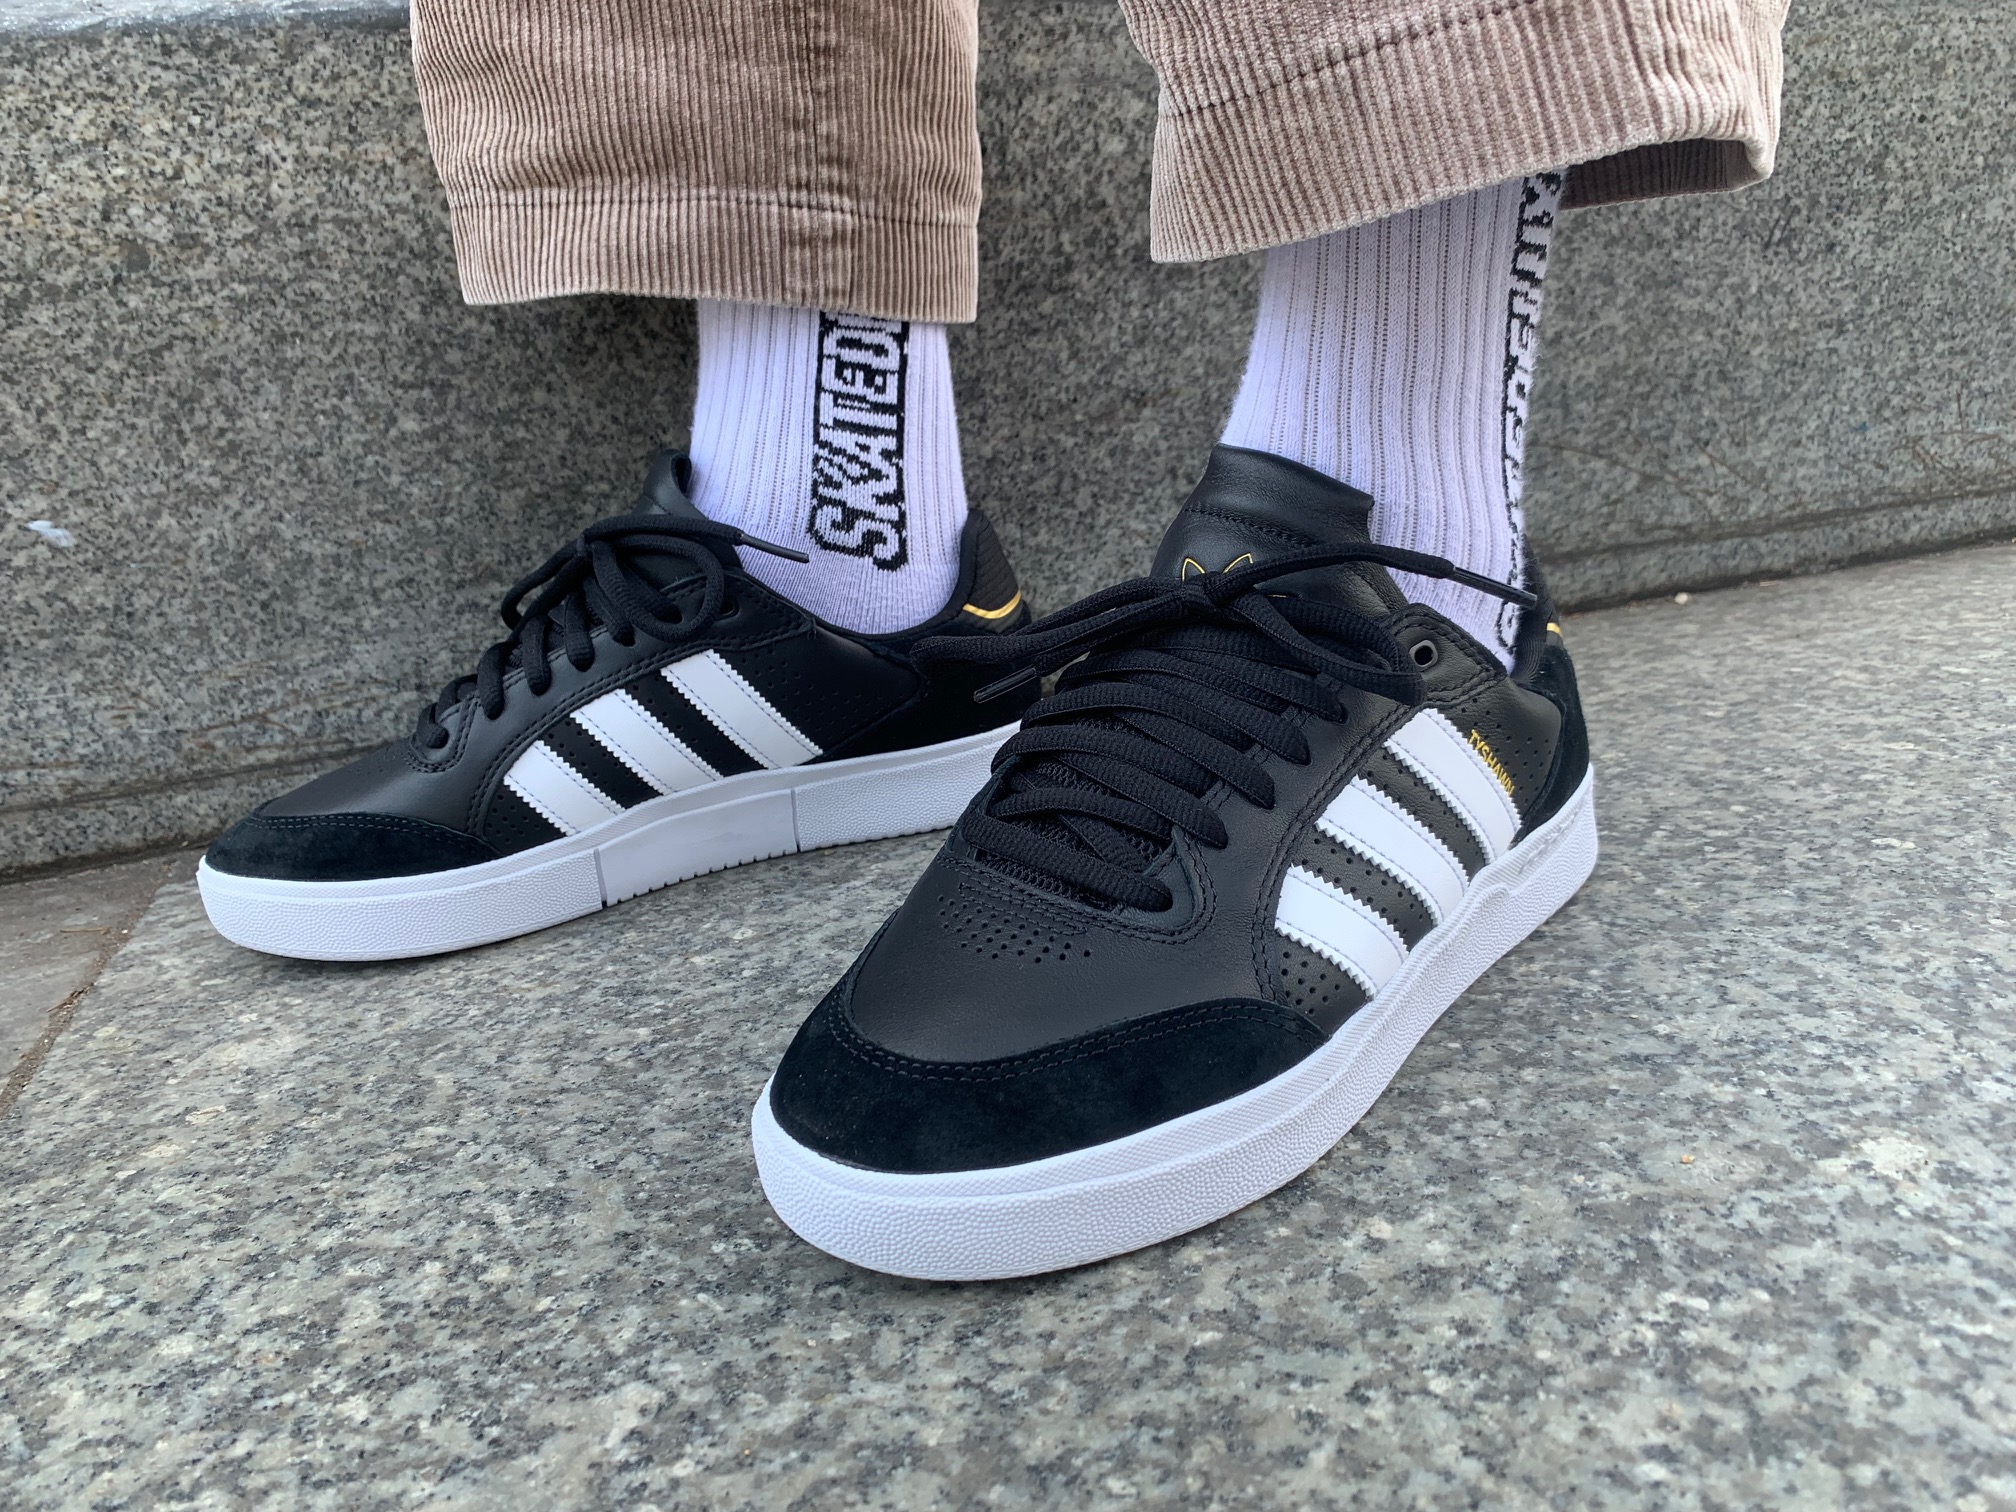 adidas Tyshawn Low wear test | review | skatedeluxe Blog